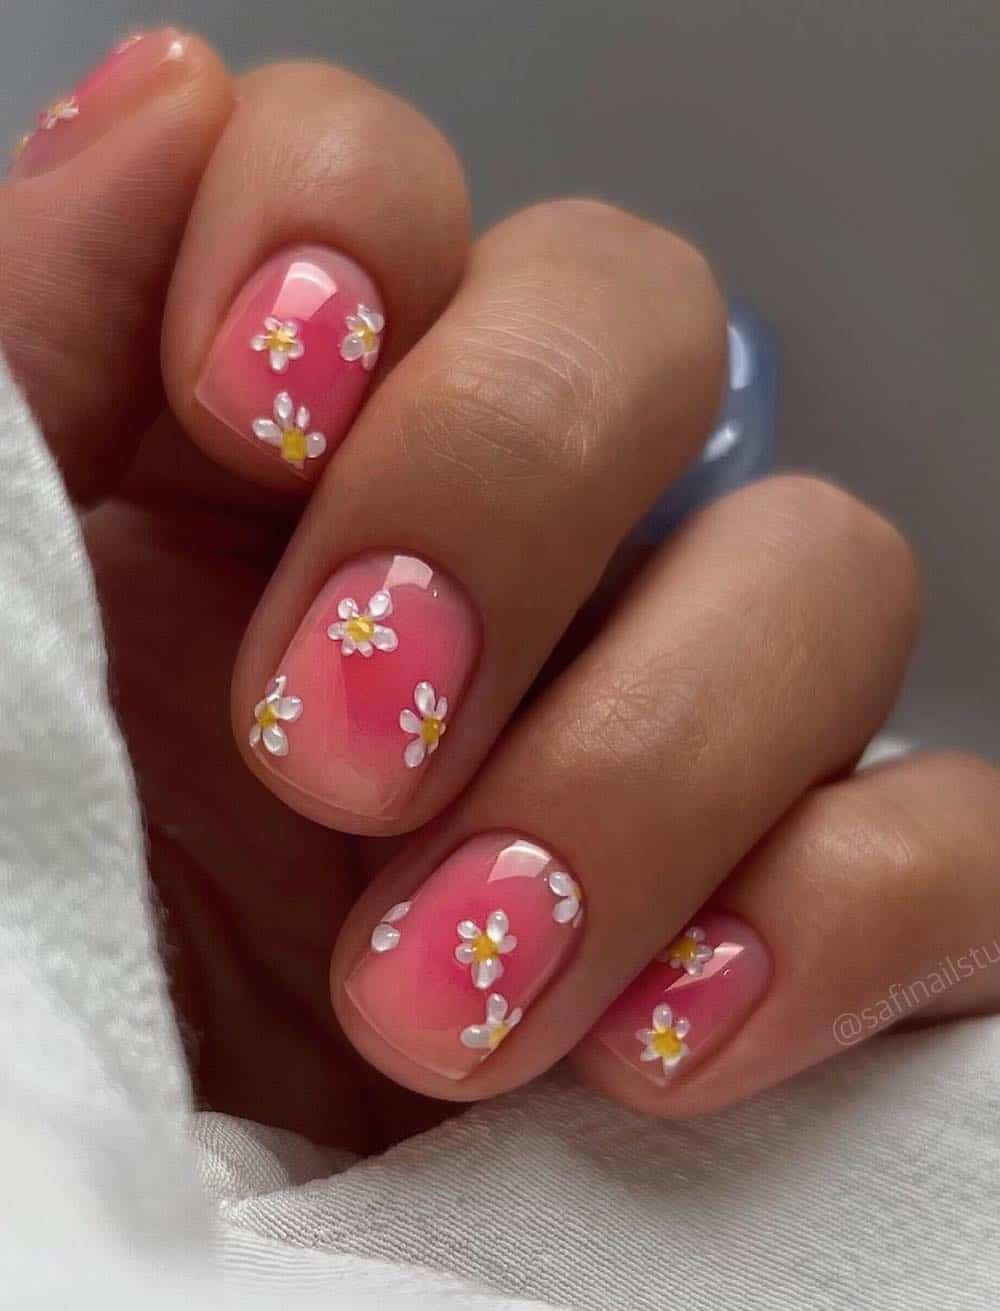 A hand with short pink jelly nails with dainty white flowers